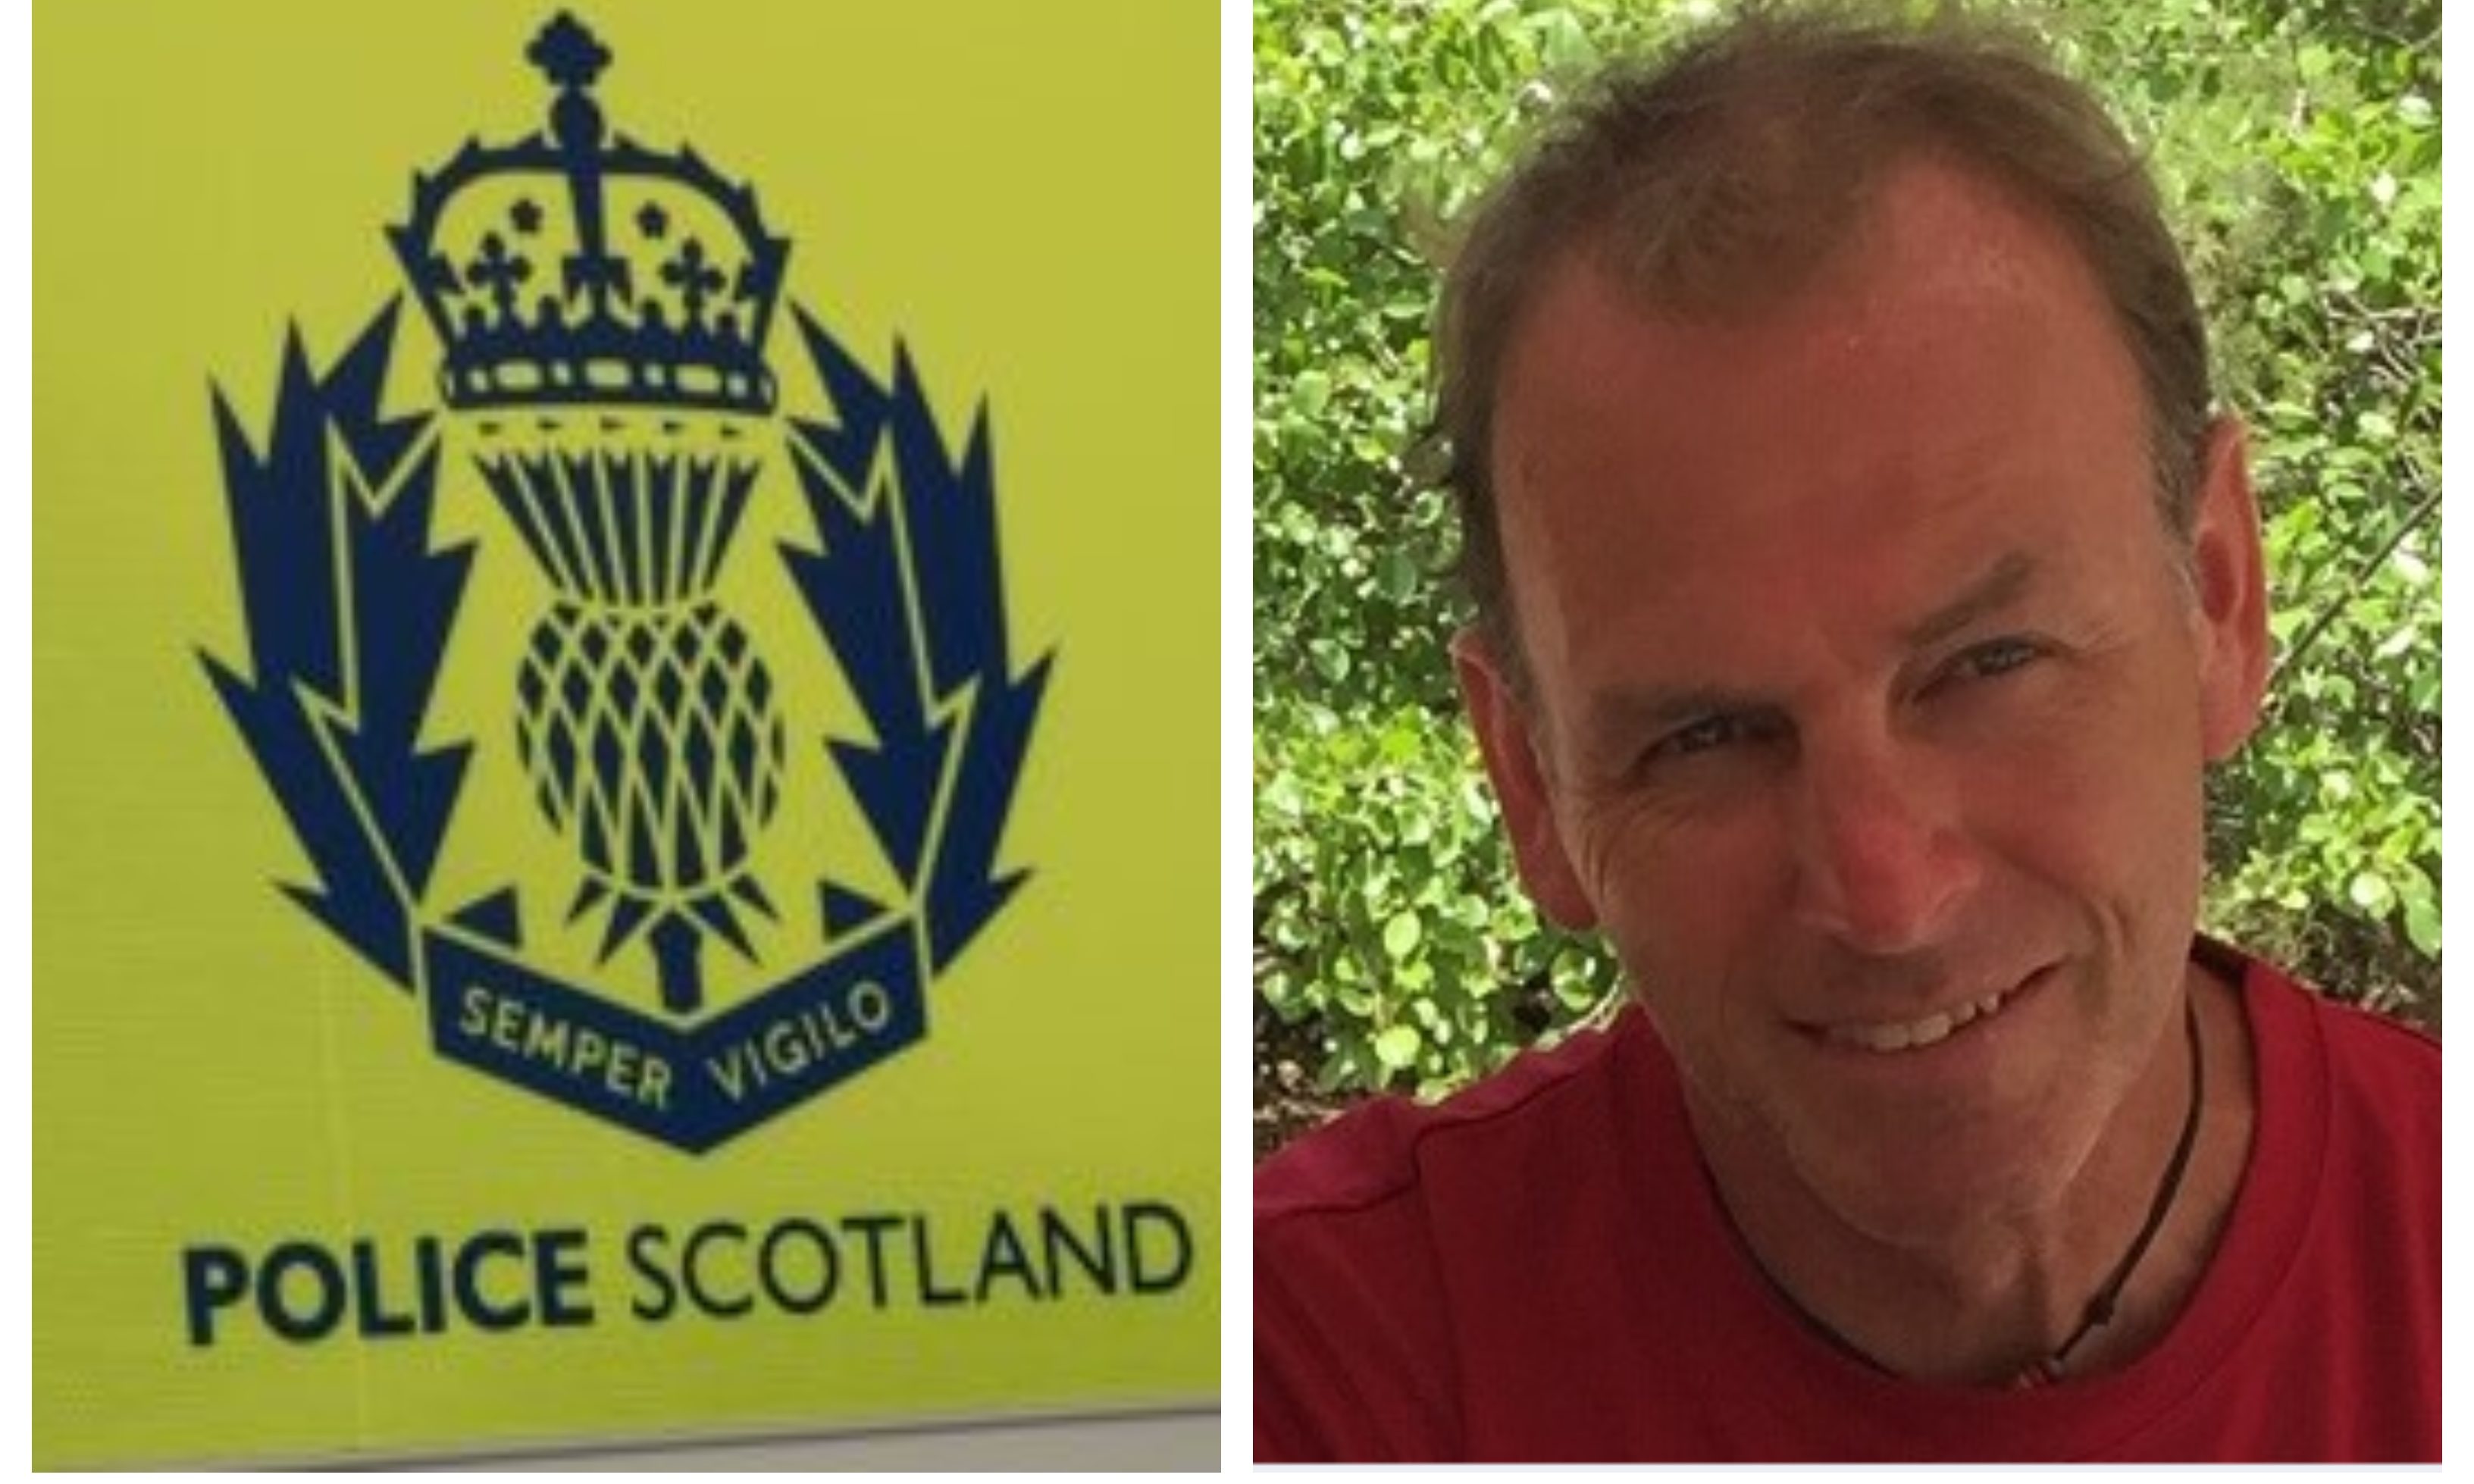 David Strachan has been reported missing